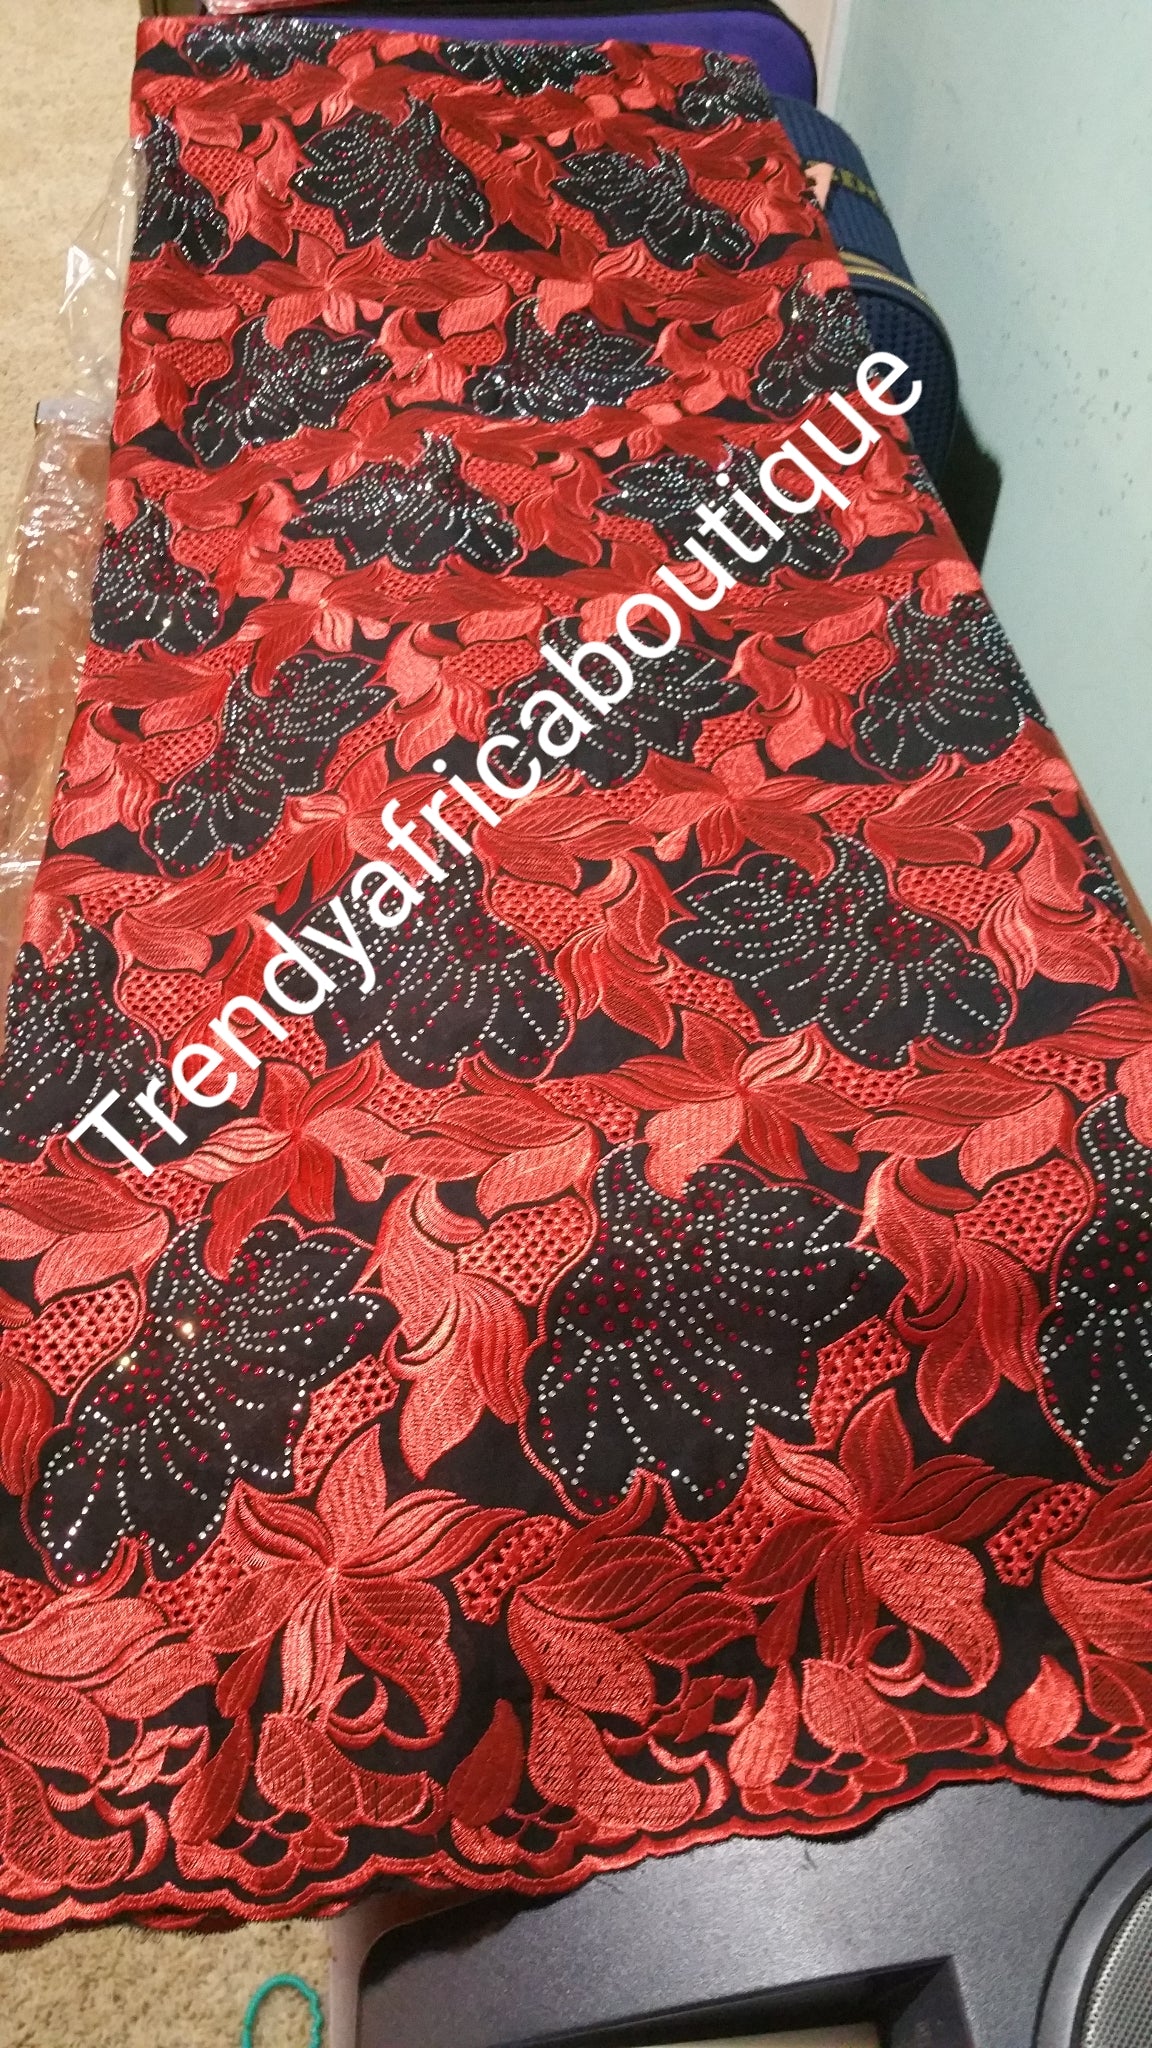 Quality Red/black Swiss lace fabric for African party. Embellished with Dazzling red &silver crystals. Sold 5yds